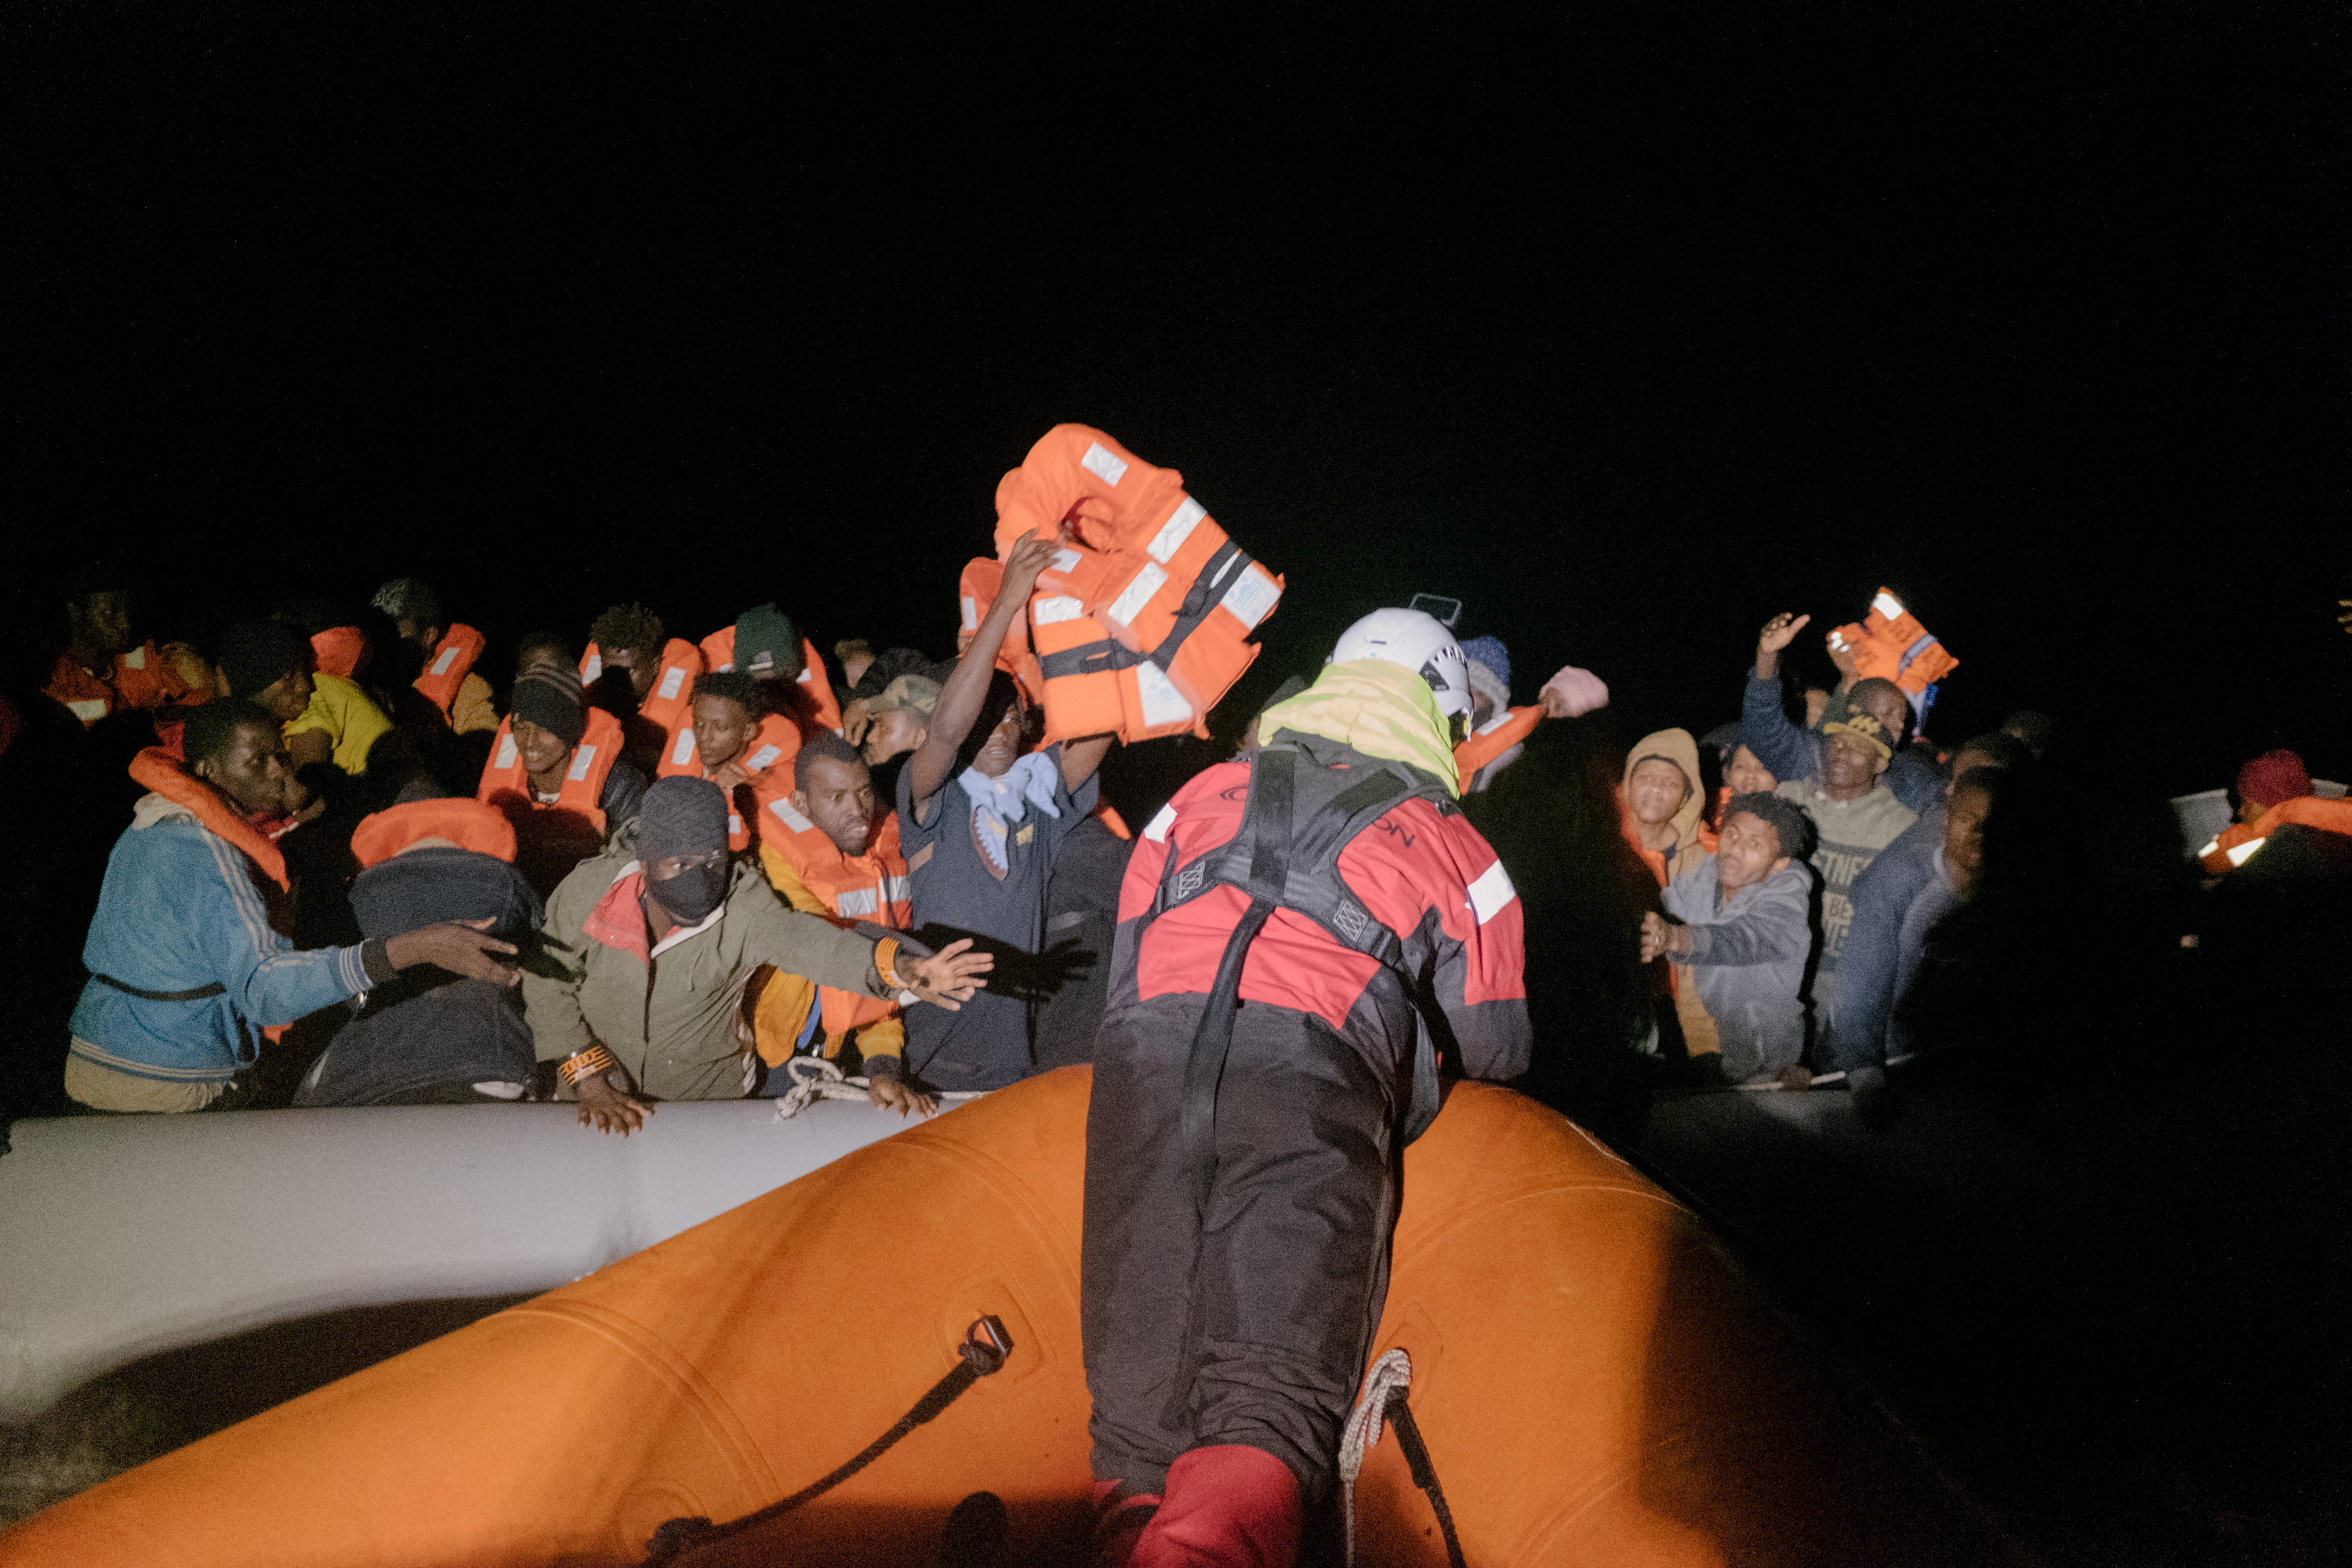 Migrants are rescued by members of the German NGO Sea-Watch during a search and rescue (SAR) operation in the Mediterranean Sea on Christmas day, December 25, 2021.  Max Brugger/Sea Watch/Handout via REUTERS  